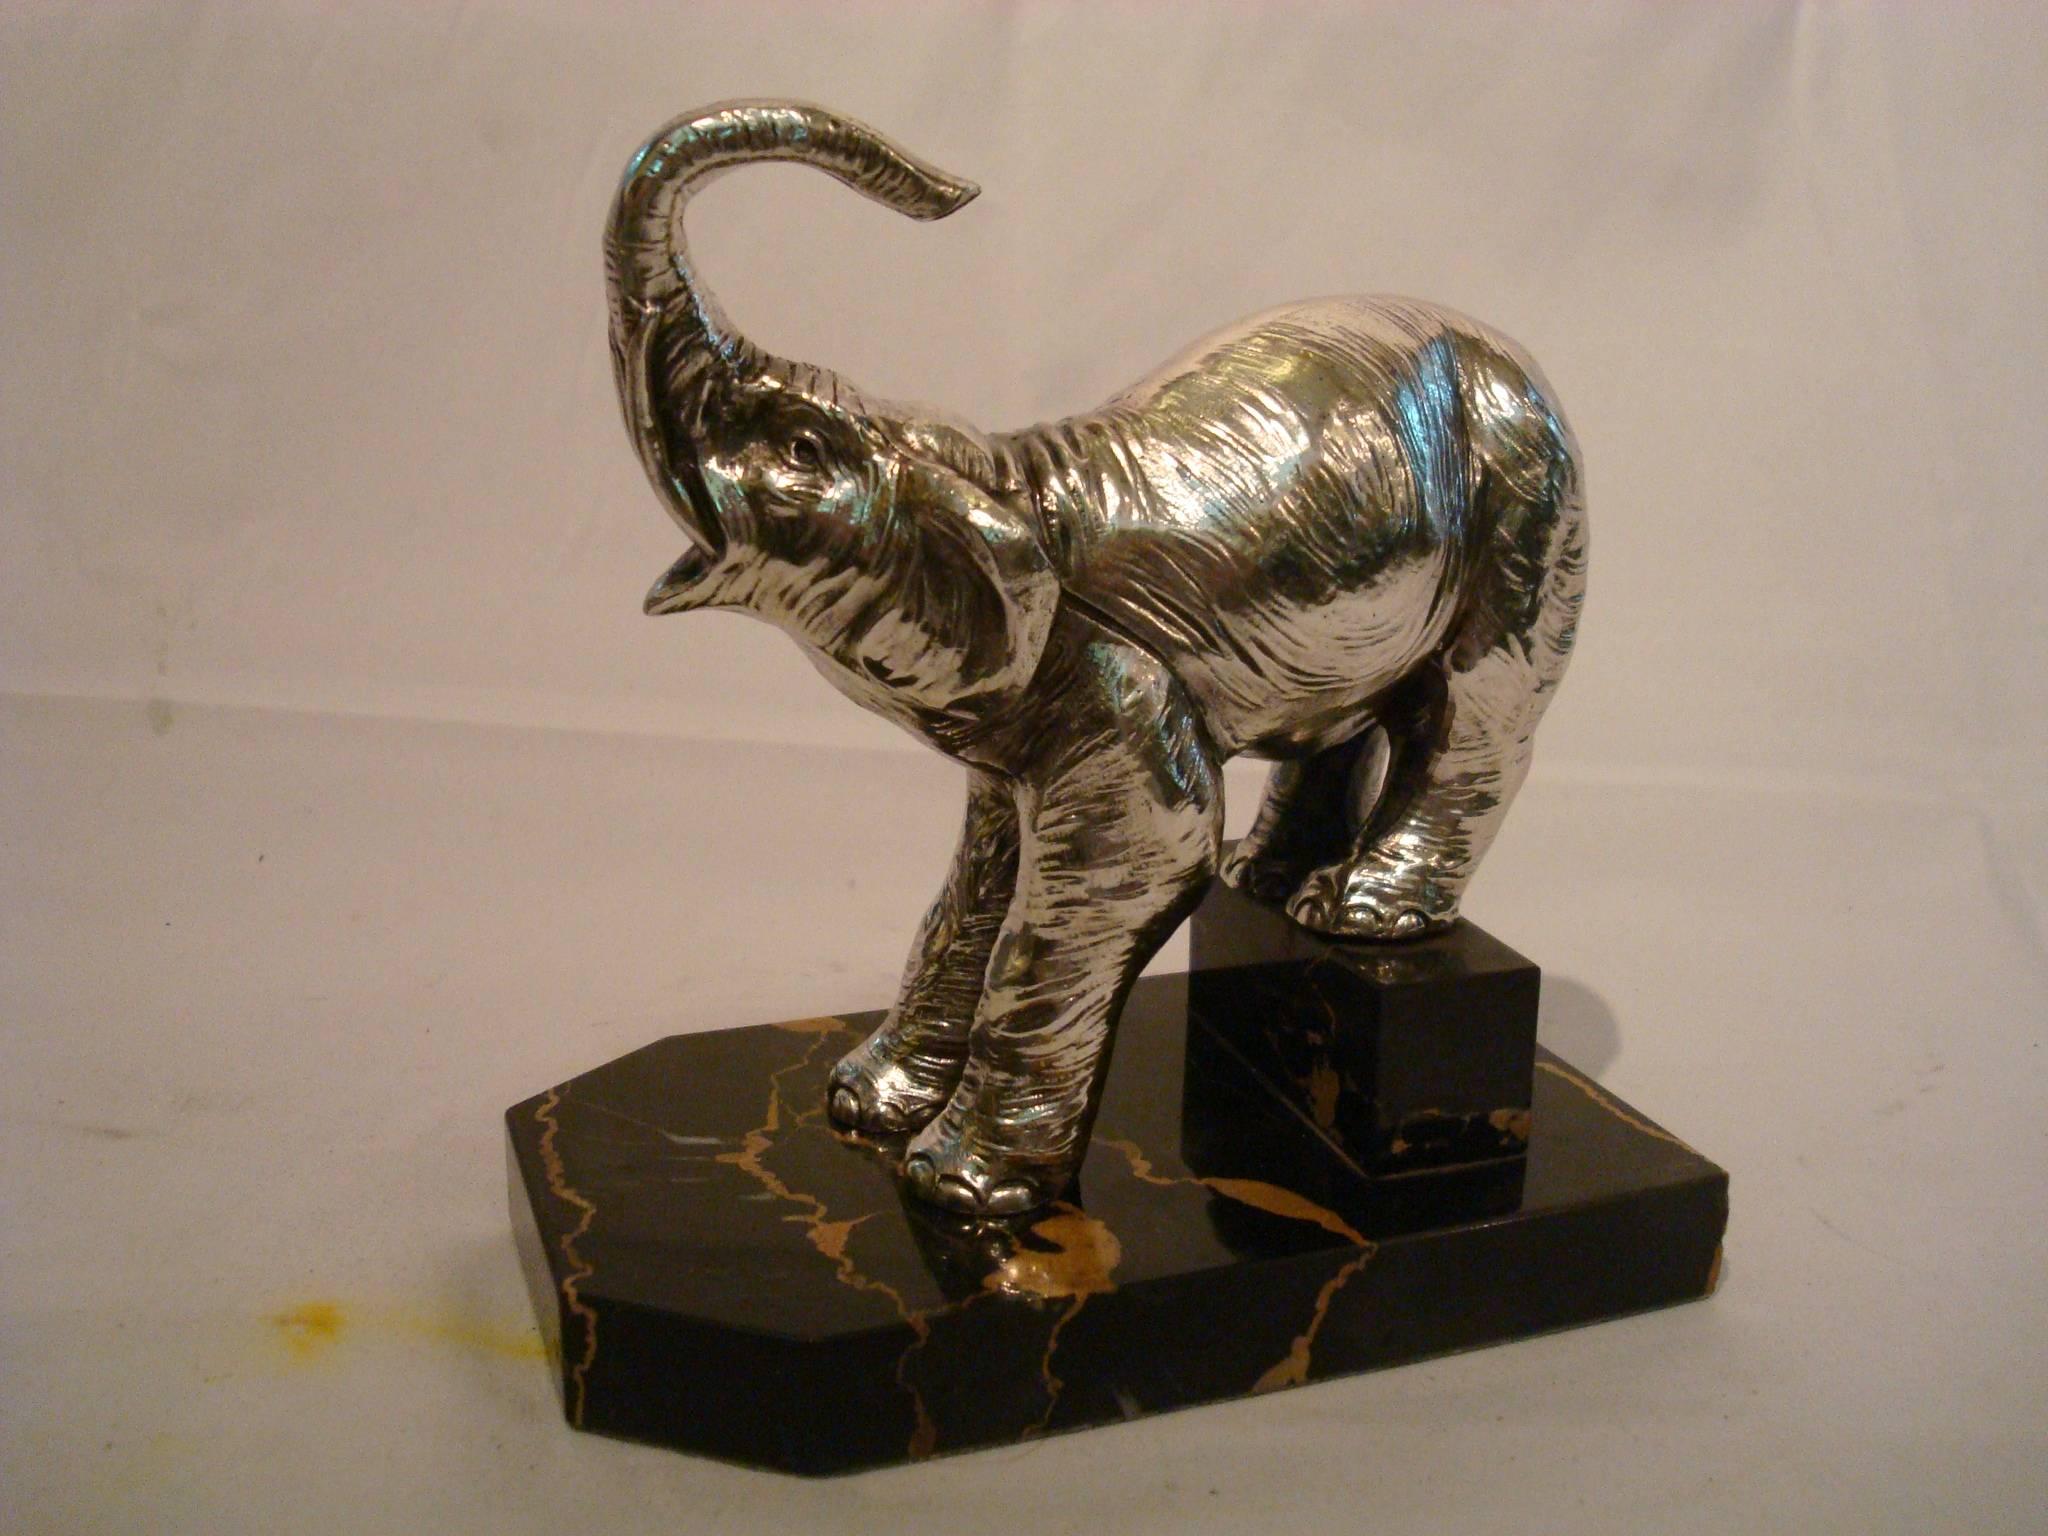 Silvered Art Deco Elephants Bookends, France, 1920s